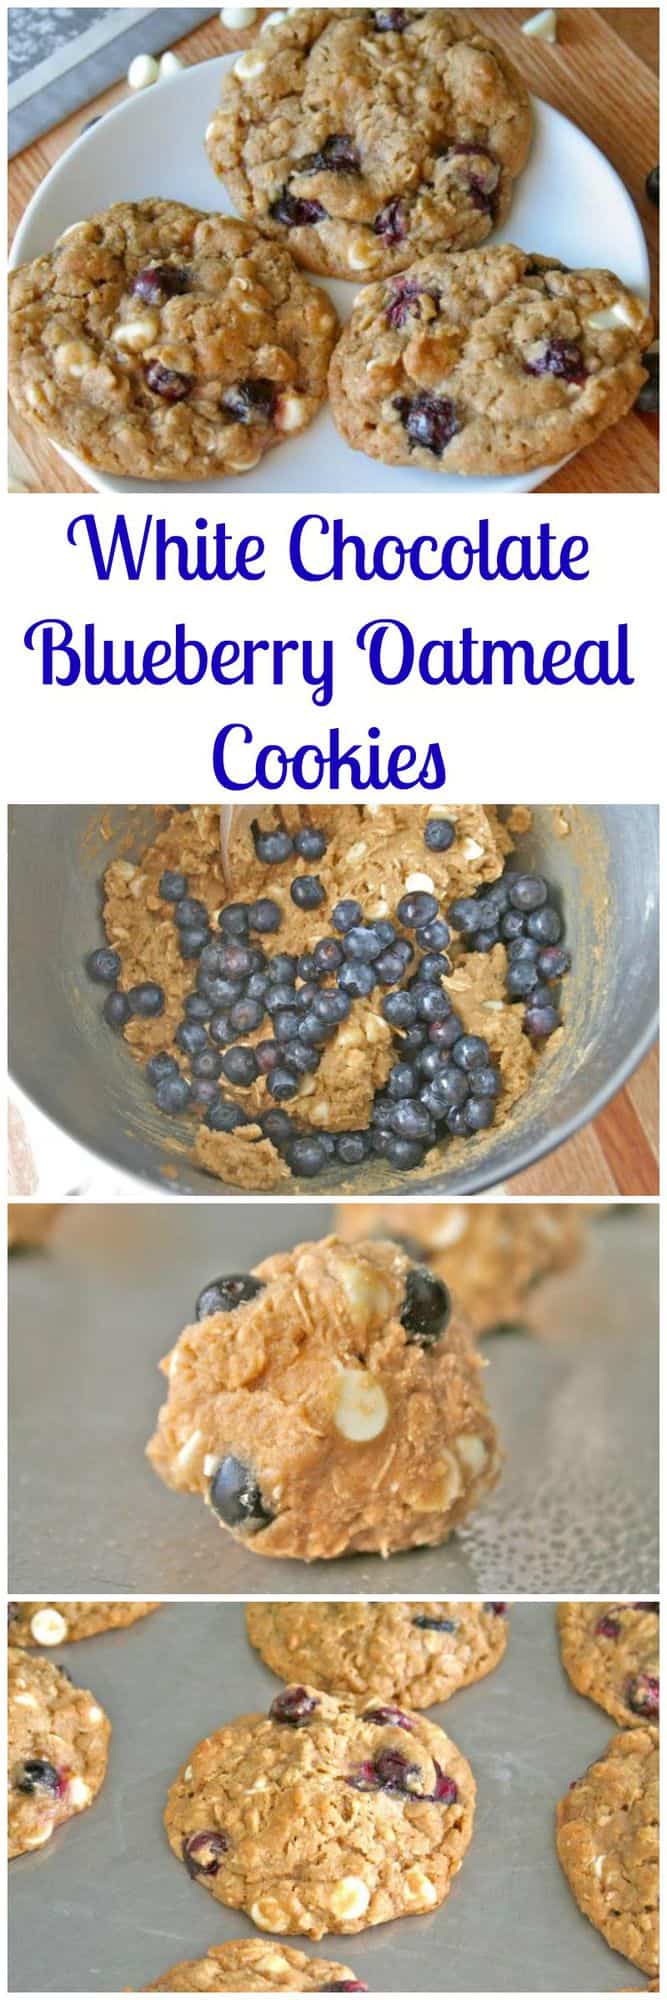 White Chocolate Blueberry Oatmeal Cookies